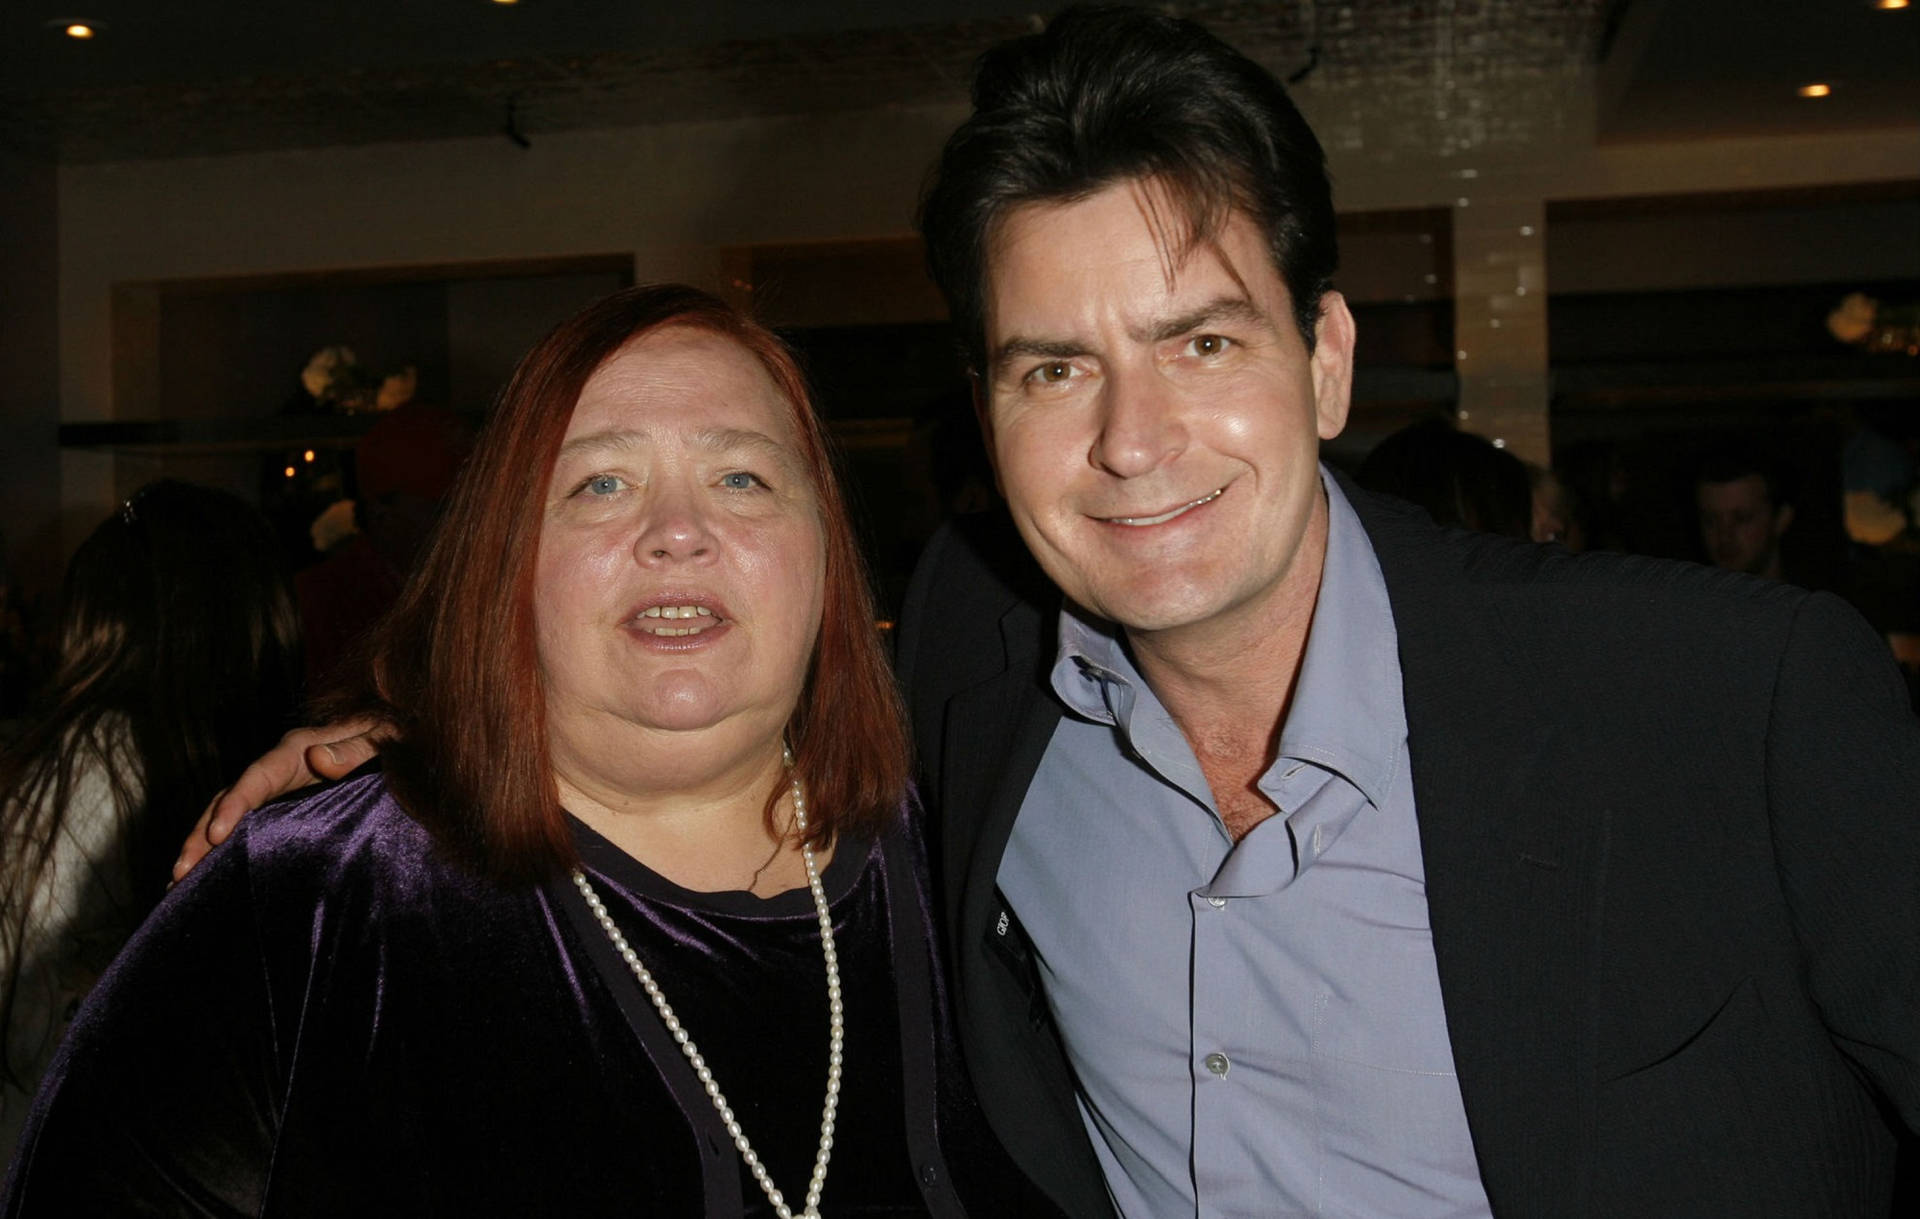 Conchata Ferrell and Charlie Sheen in TV Series Wallpaper